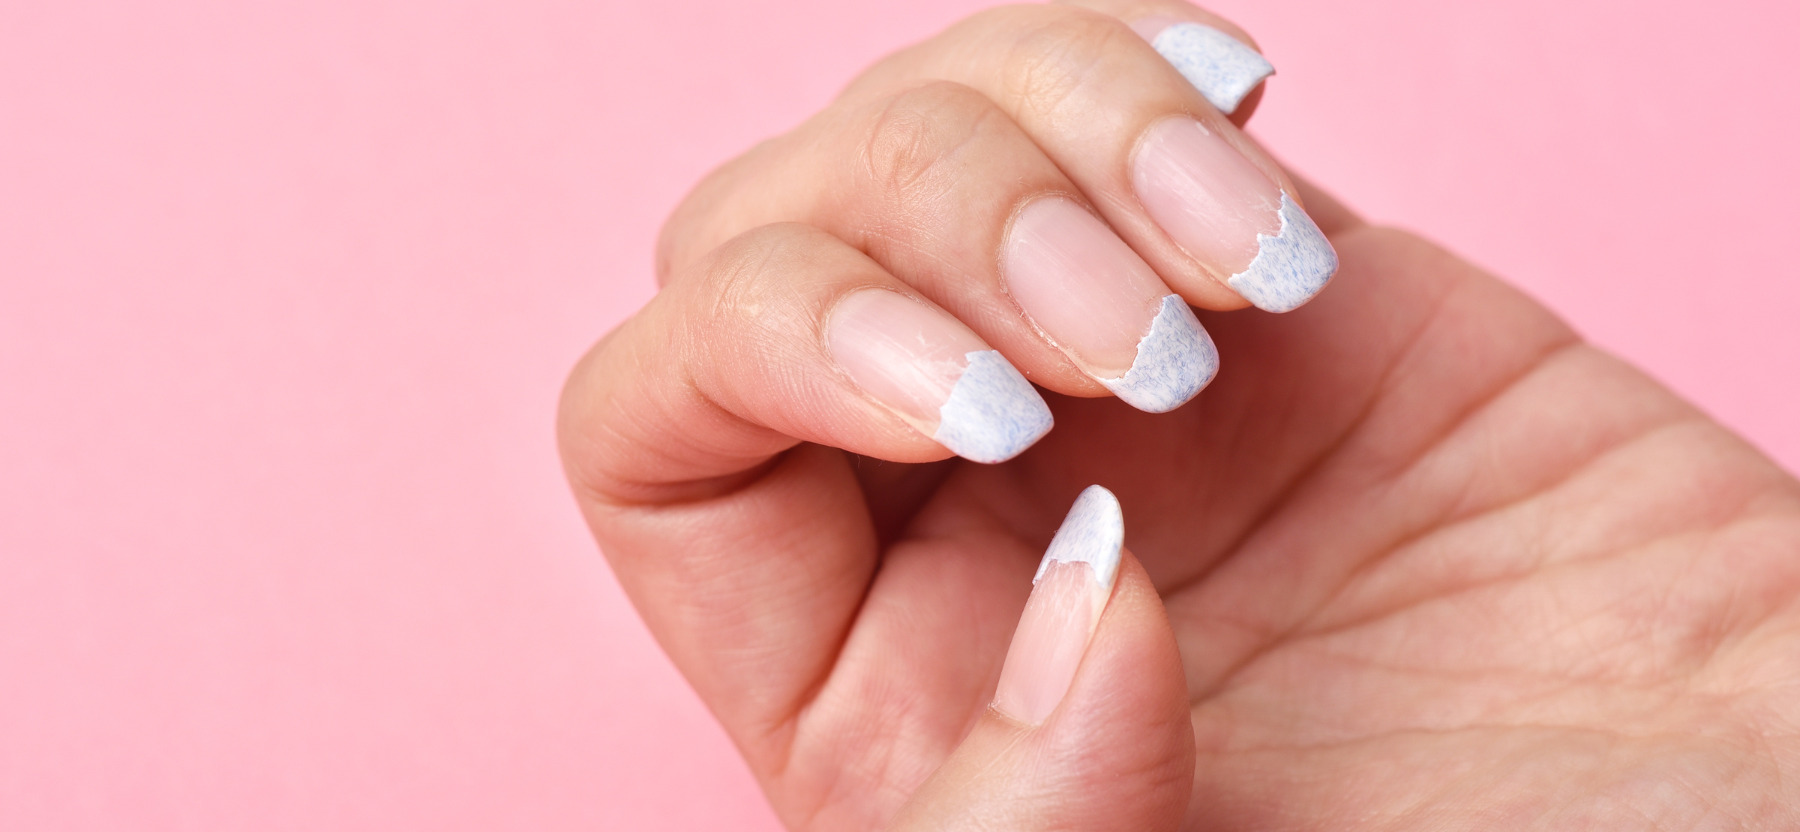 Nails and hair: what diseases affect them? - Alegria Medical Centre